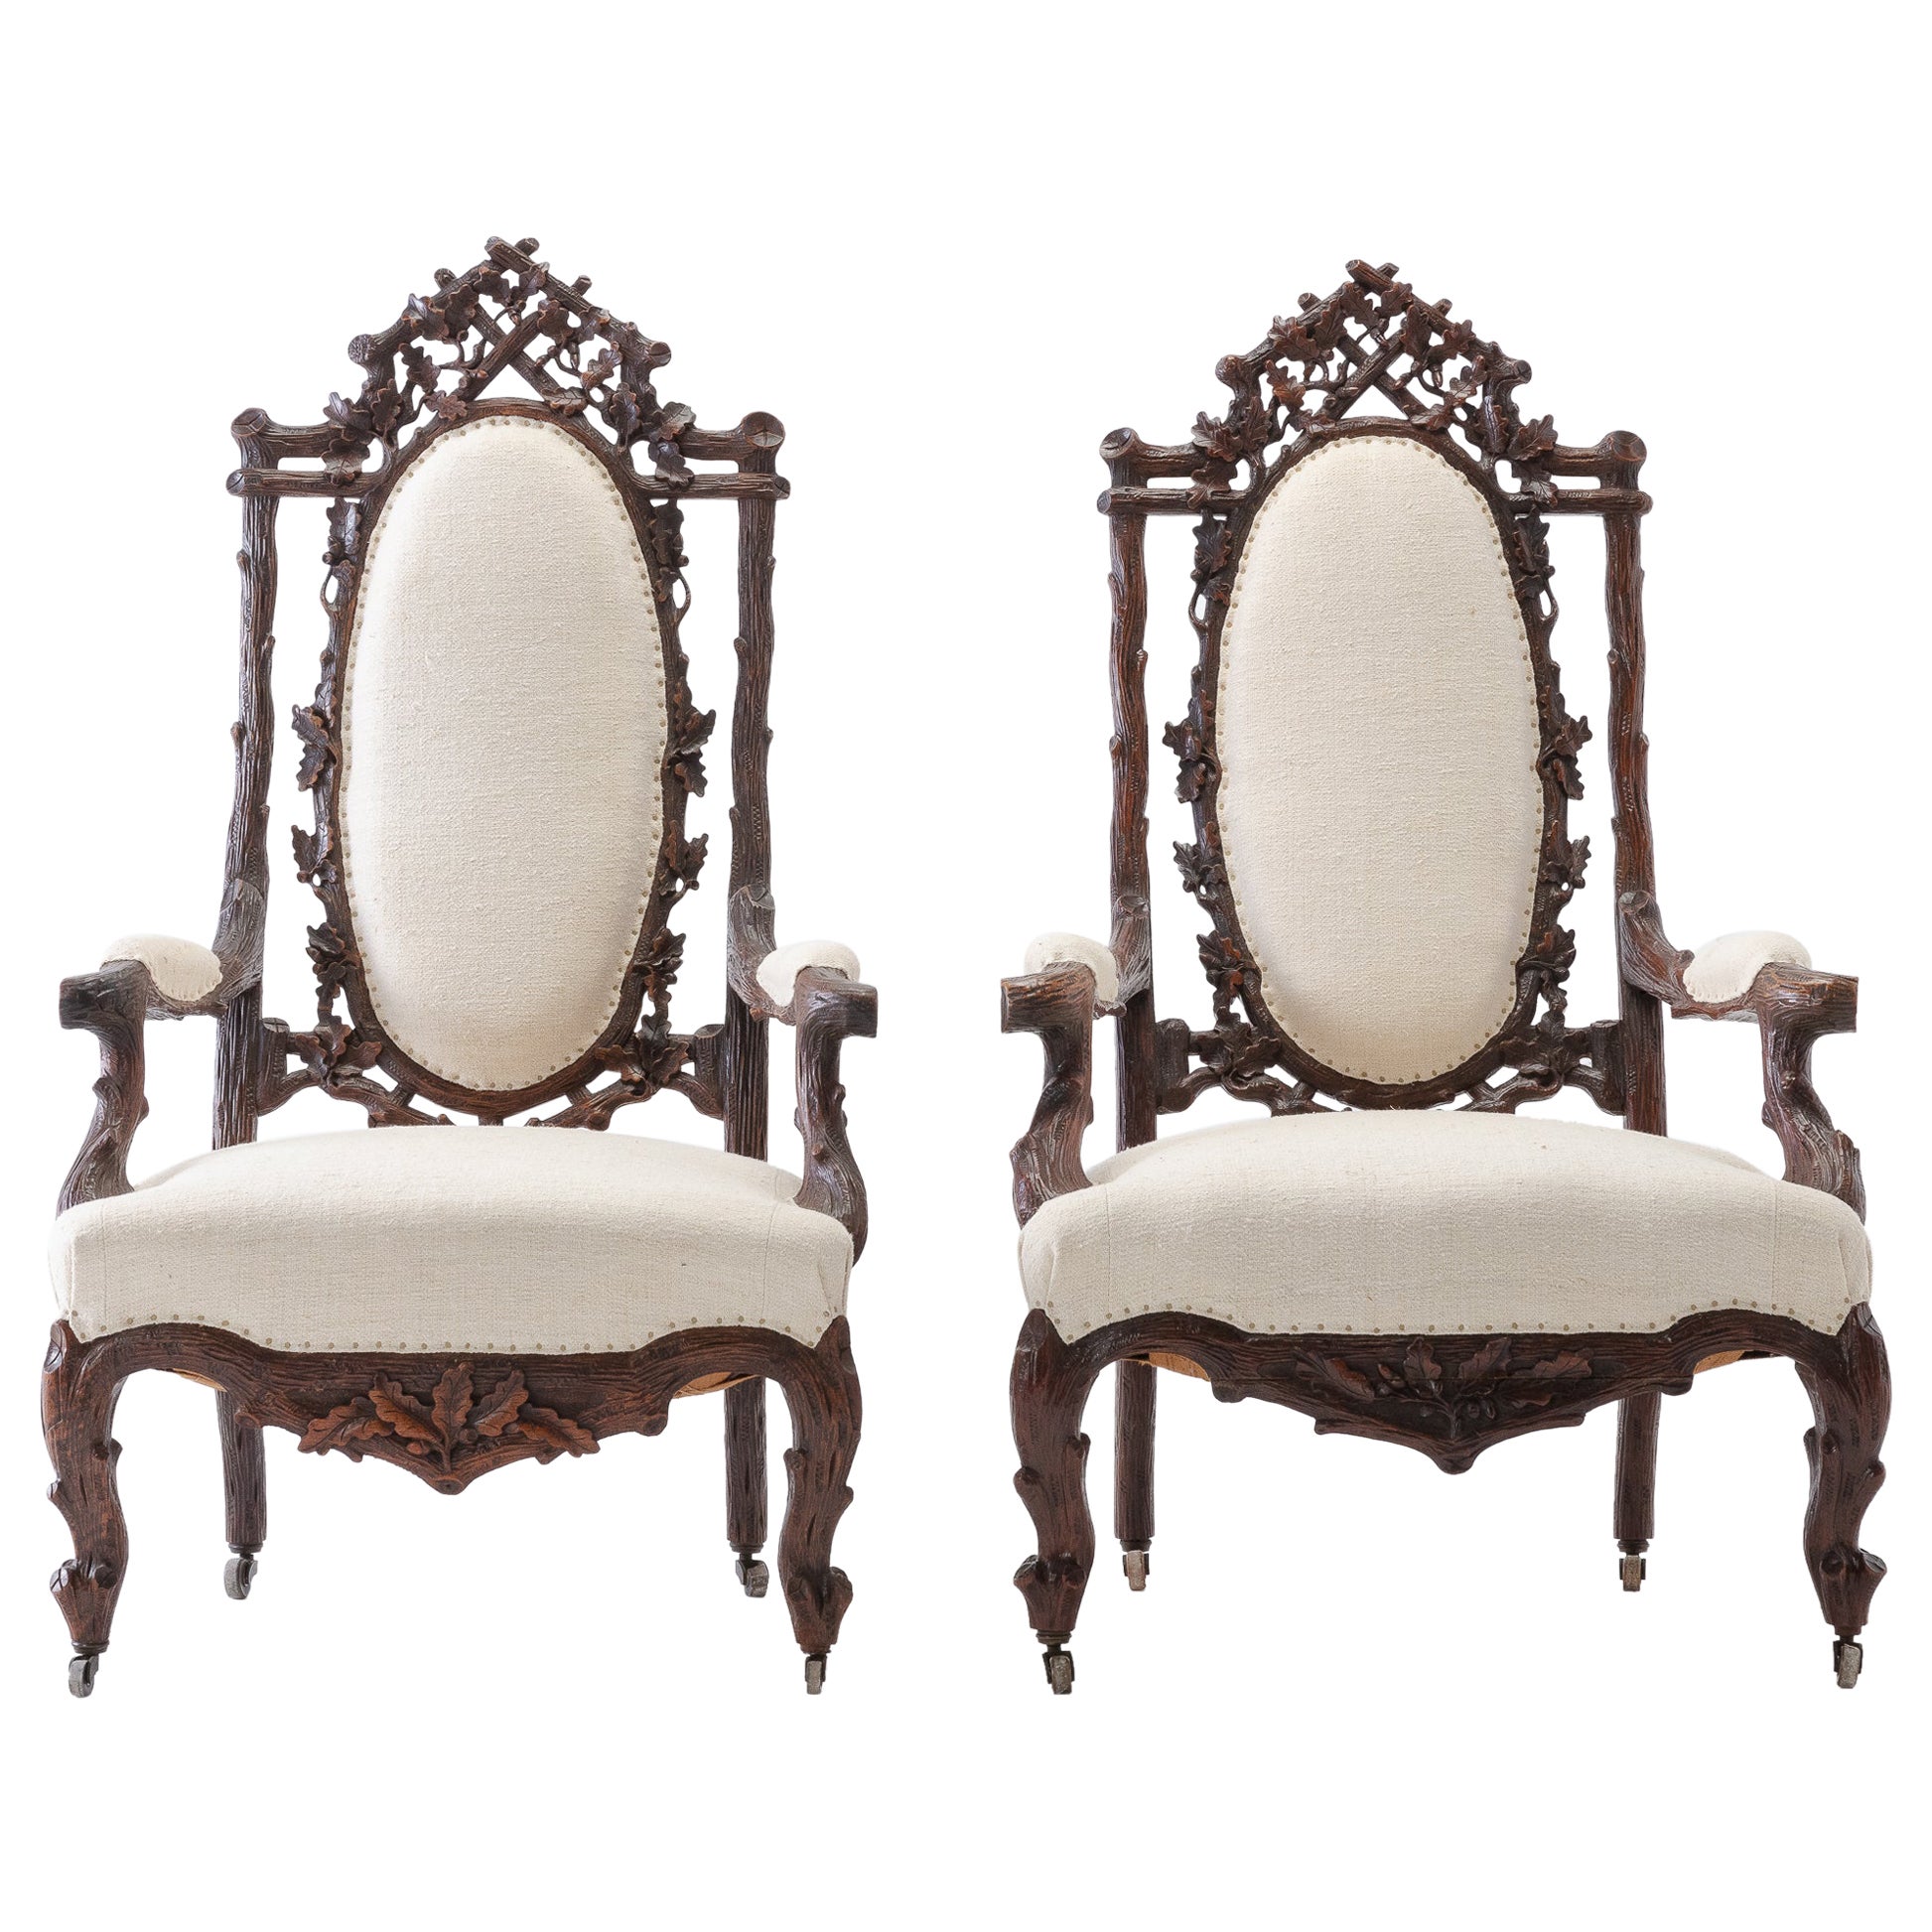 Pair of 19th Century Black Forest Open Armchairs